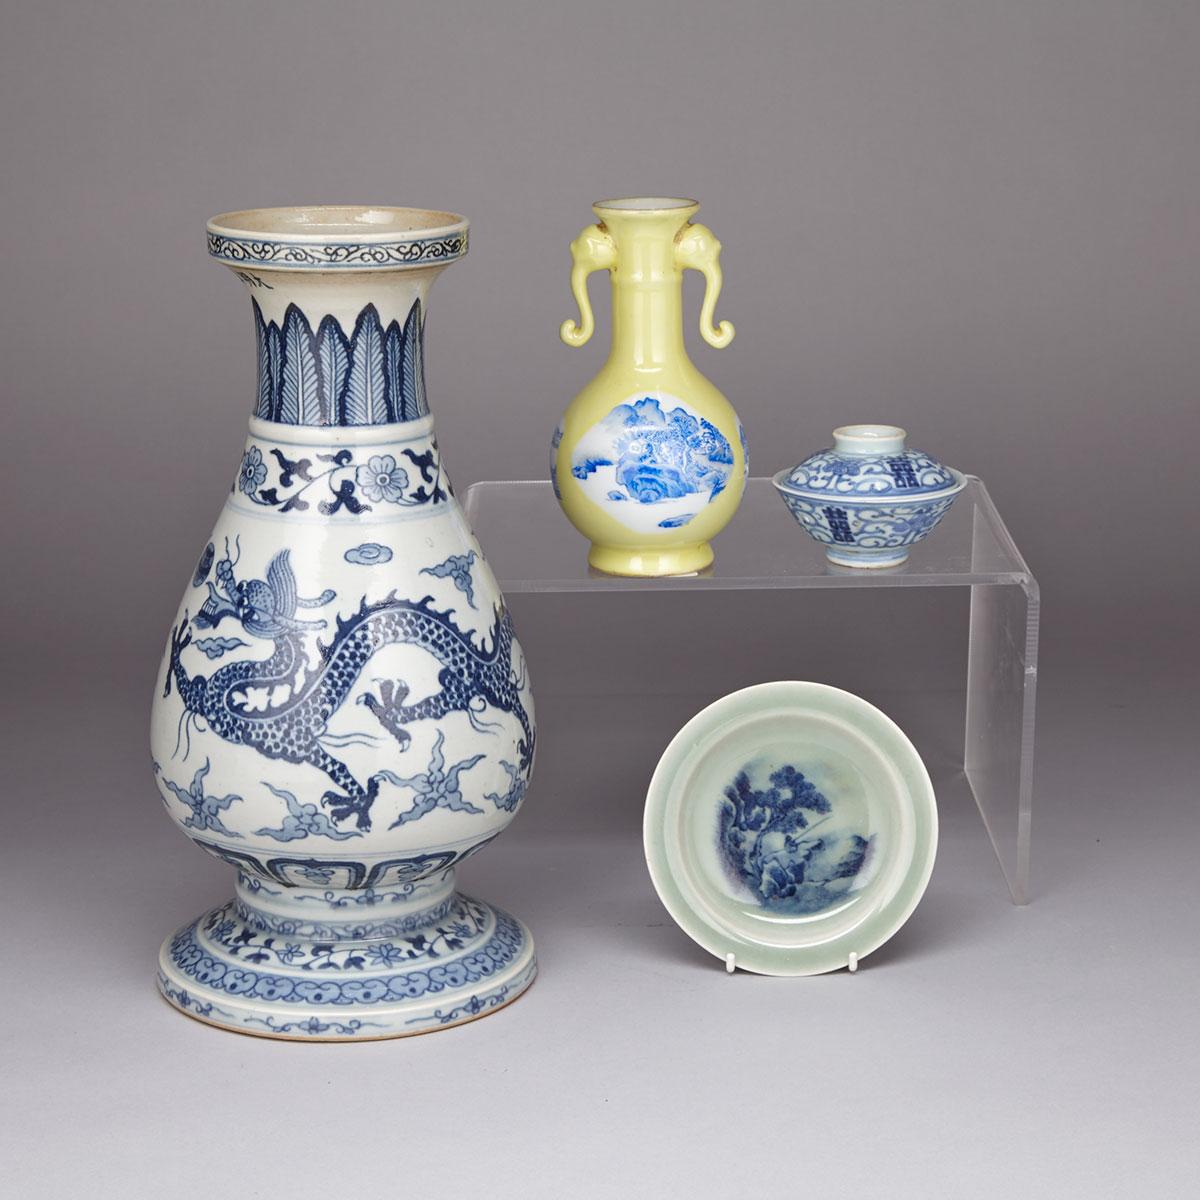 Group of Three Blue and White Wares